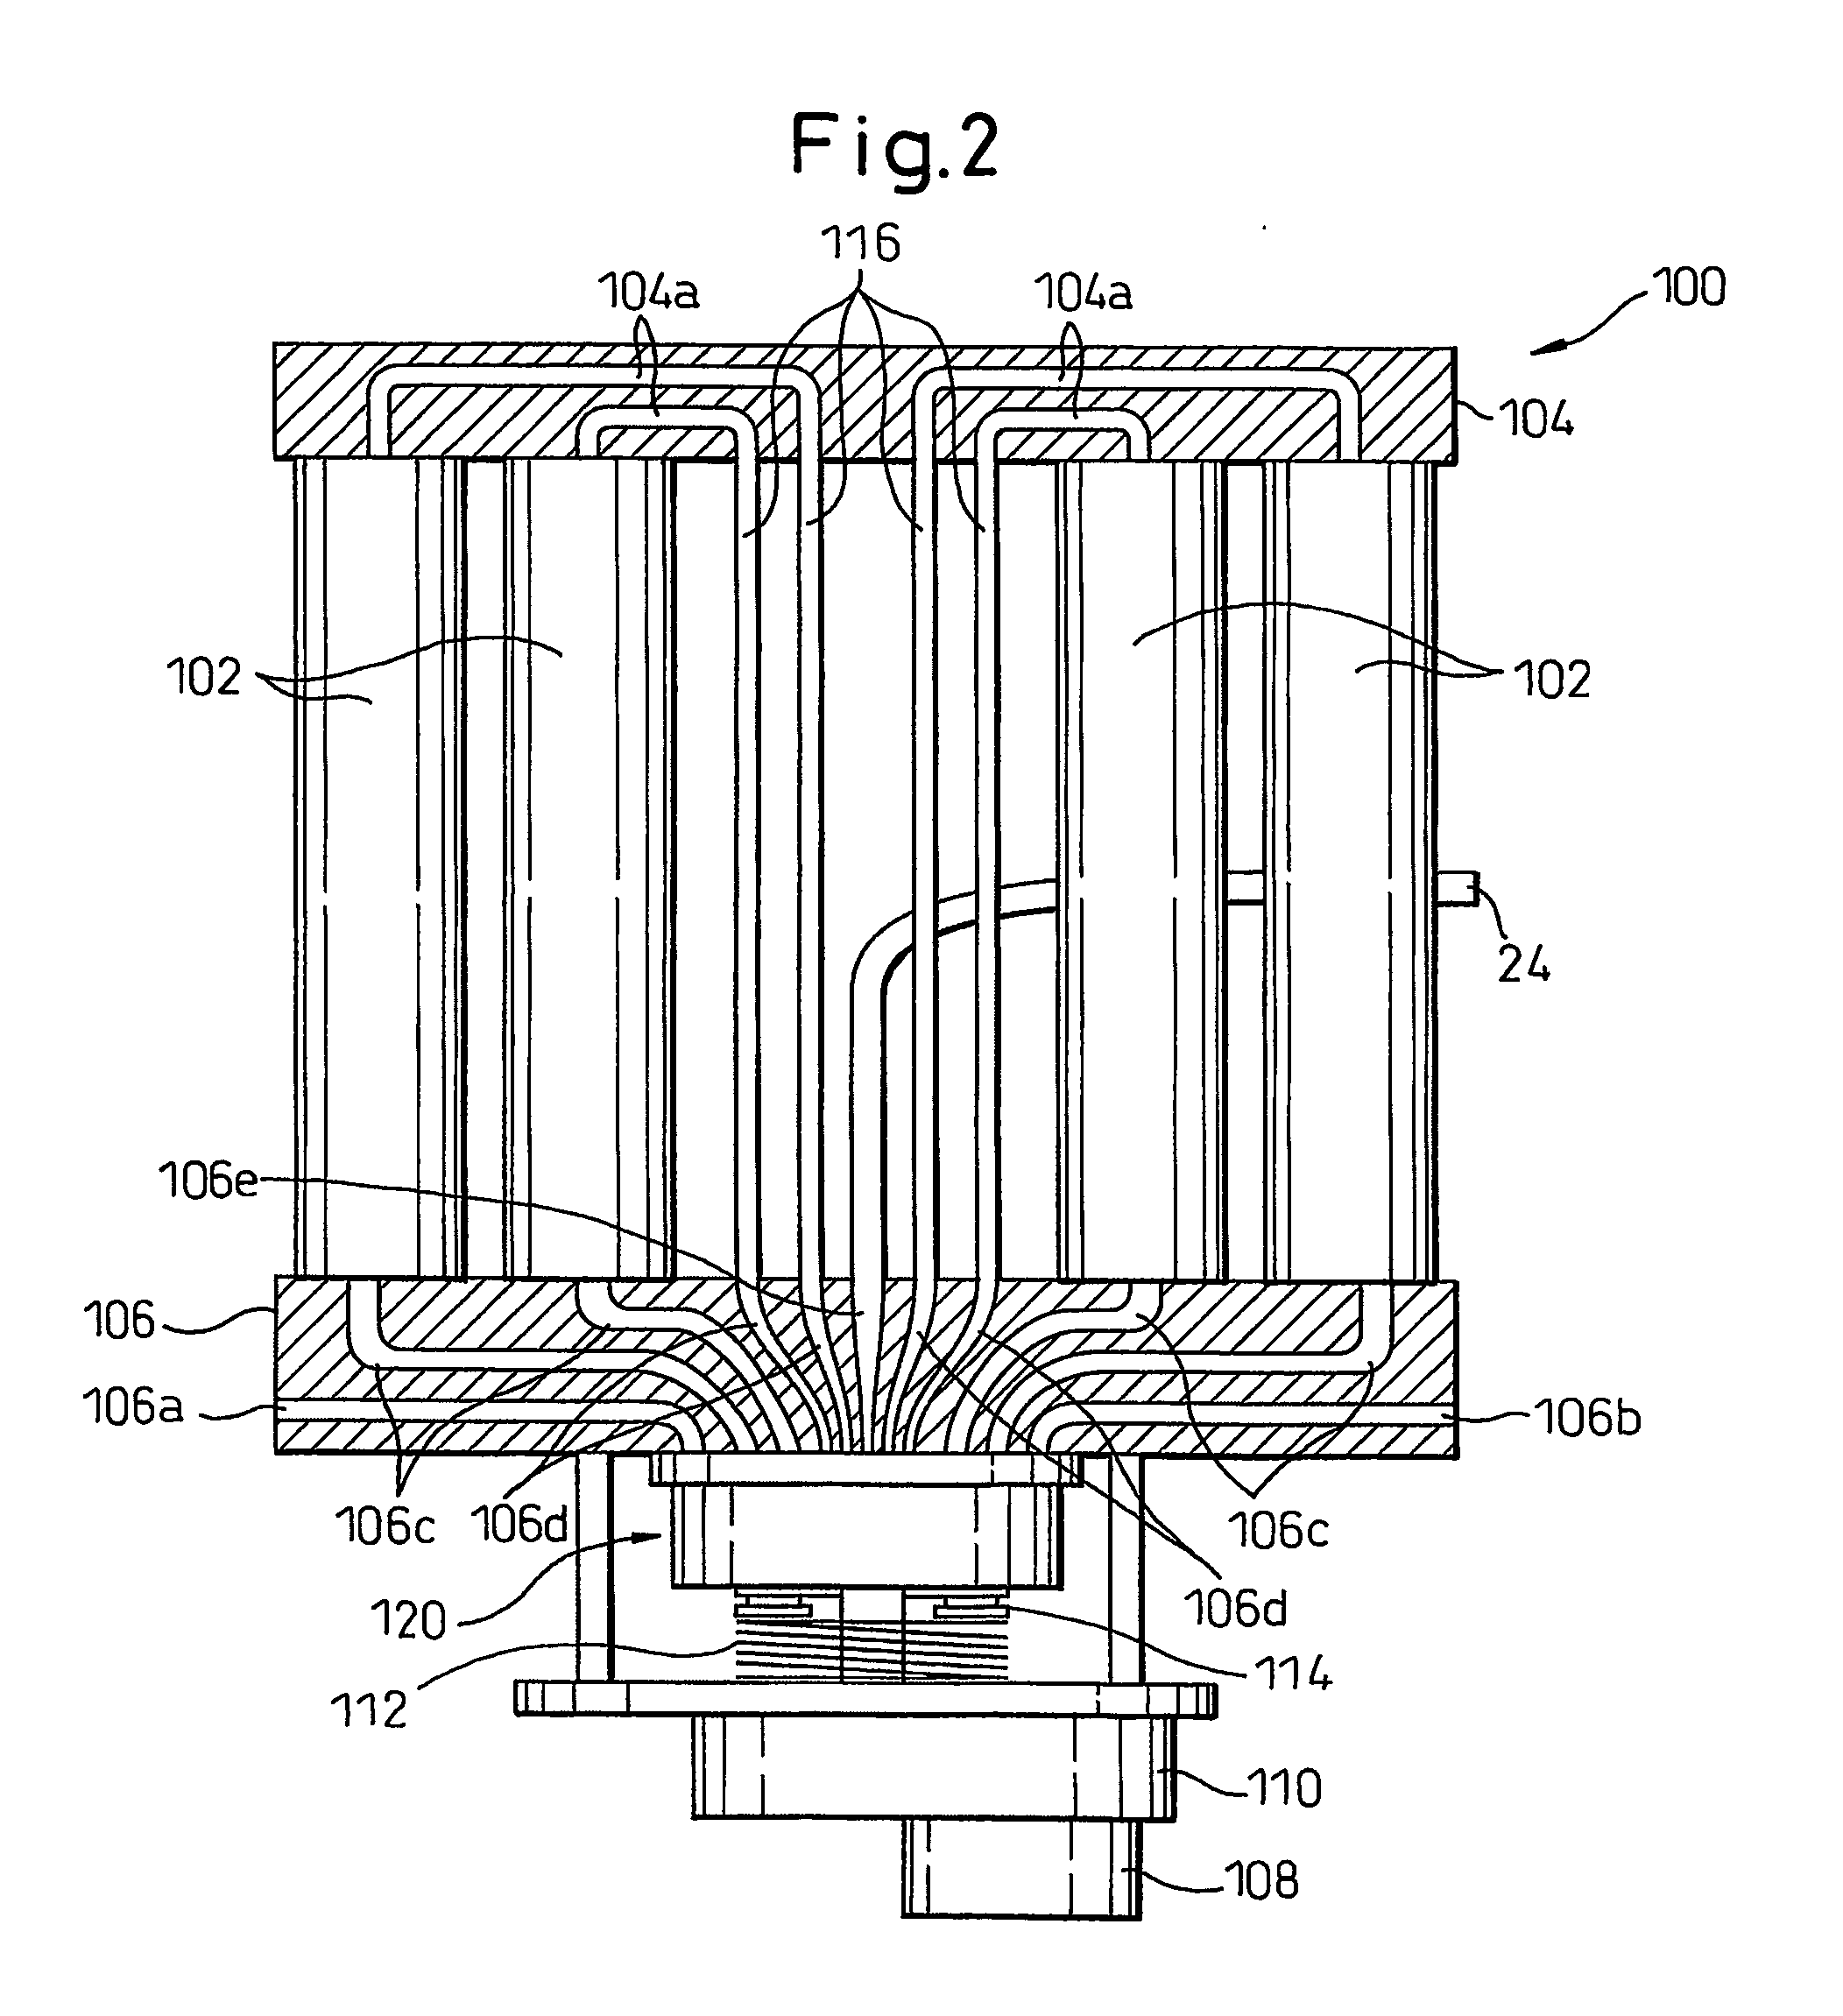 Oxygen concentrating apparatus and rotary valve